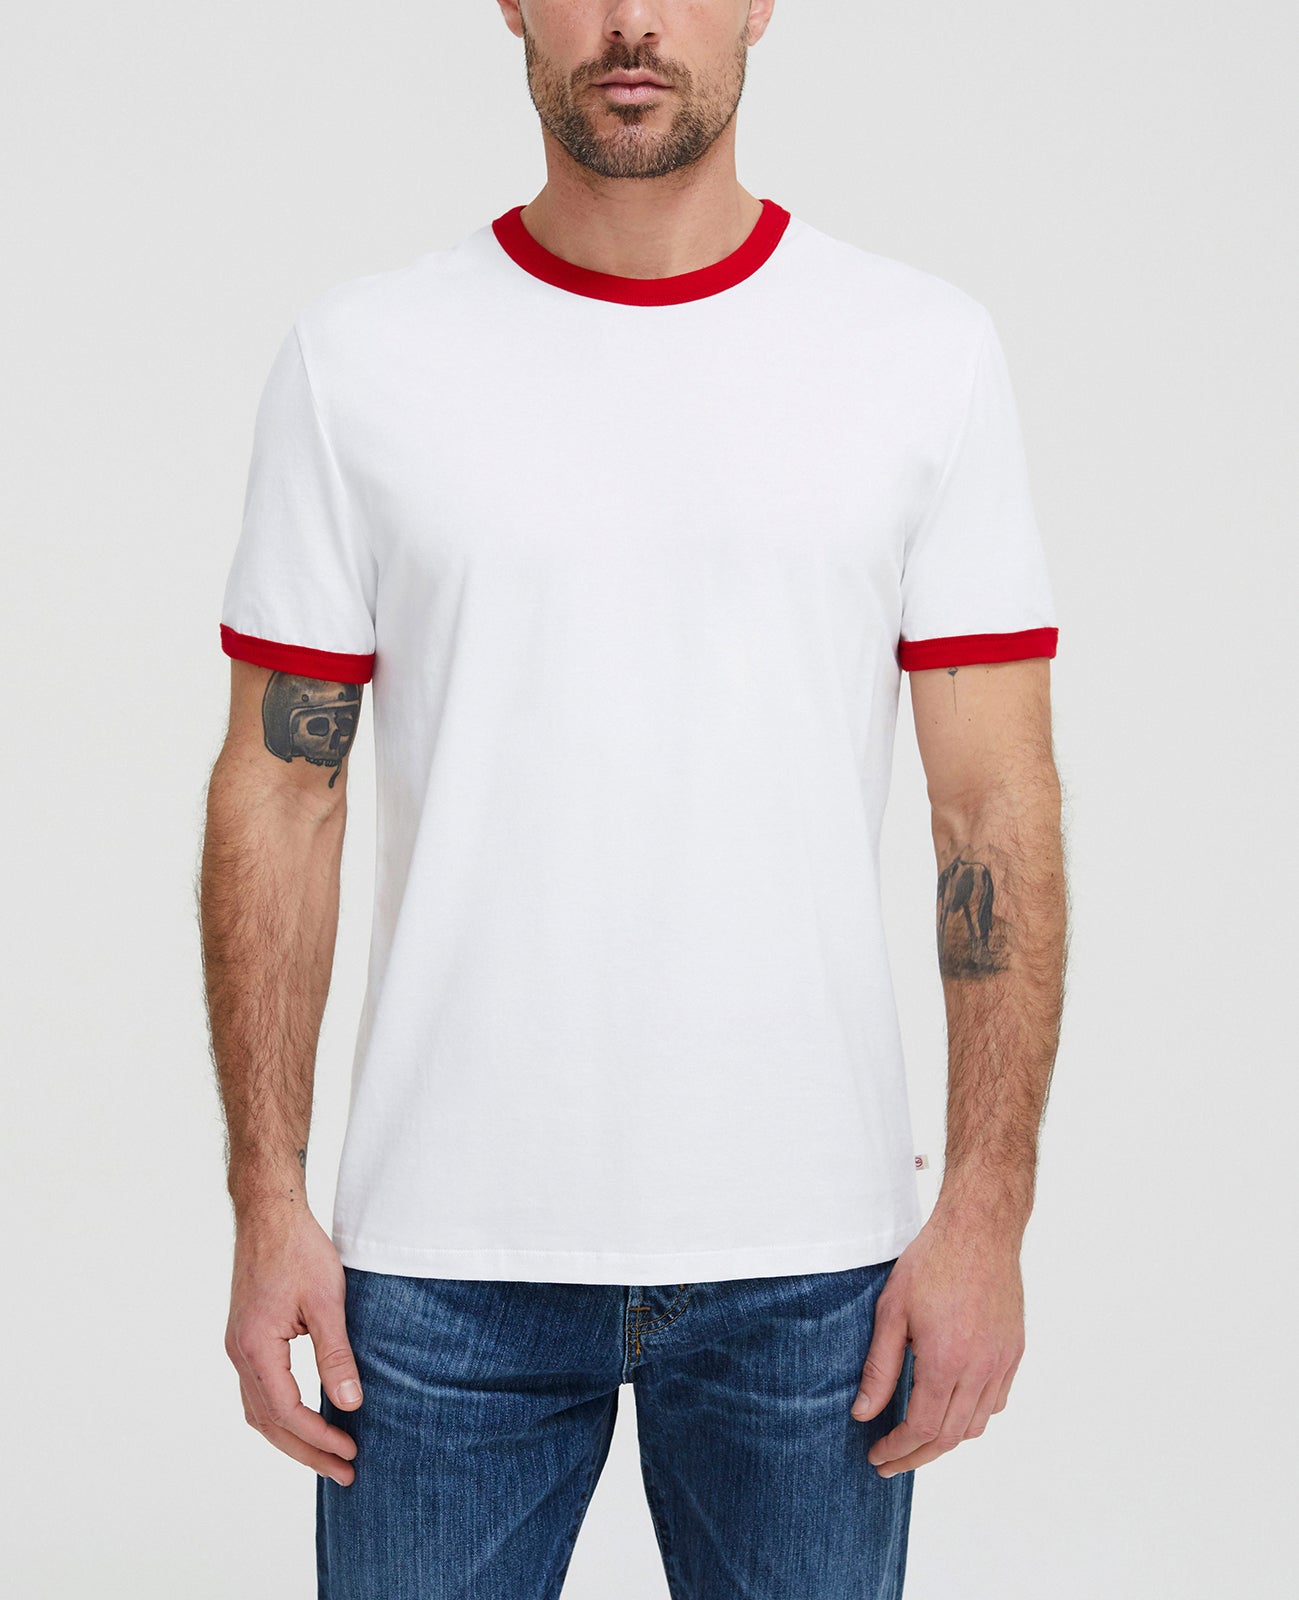 Anders Ringer Tee True White/Clever Red Short Sleeve Tee Men Tops Photo 1